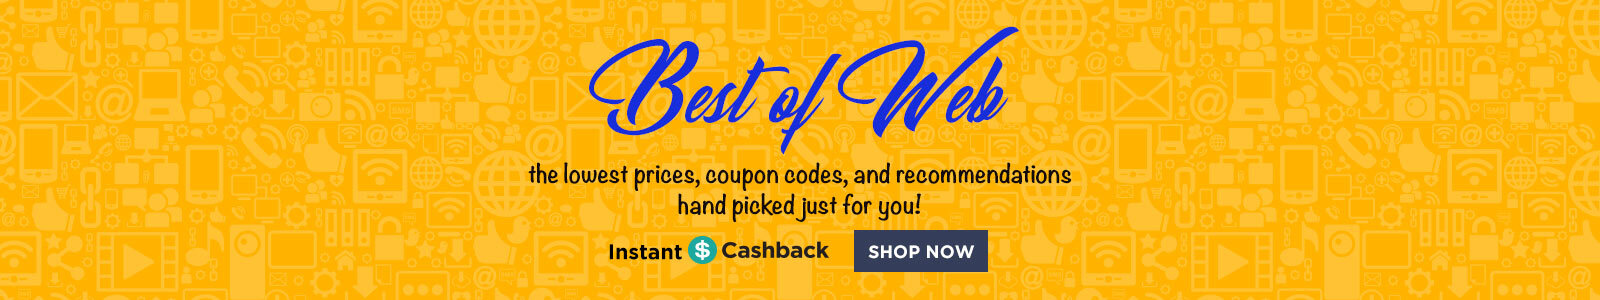 SHOP.COM Best of Web Pricing. Hand curated so you can buy with confidence. Instant Cashback.